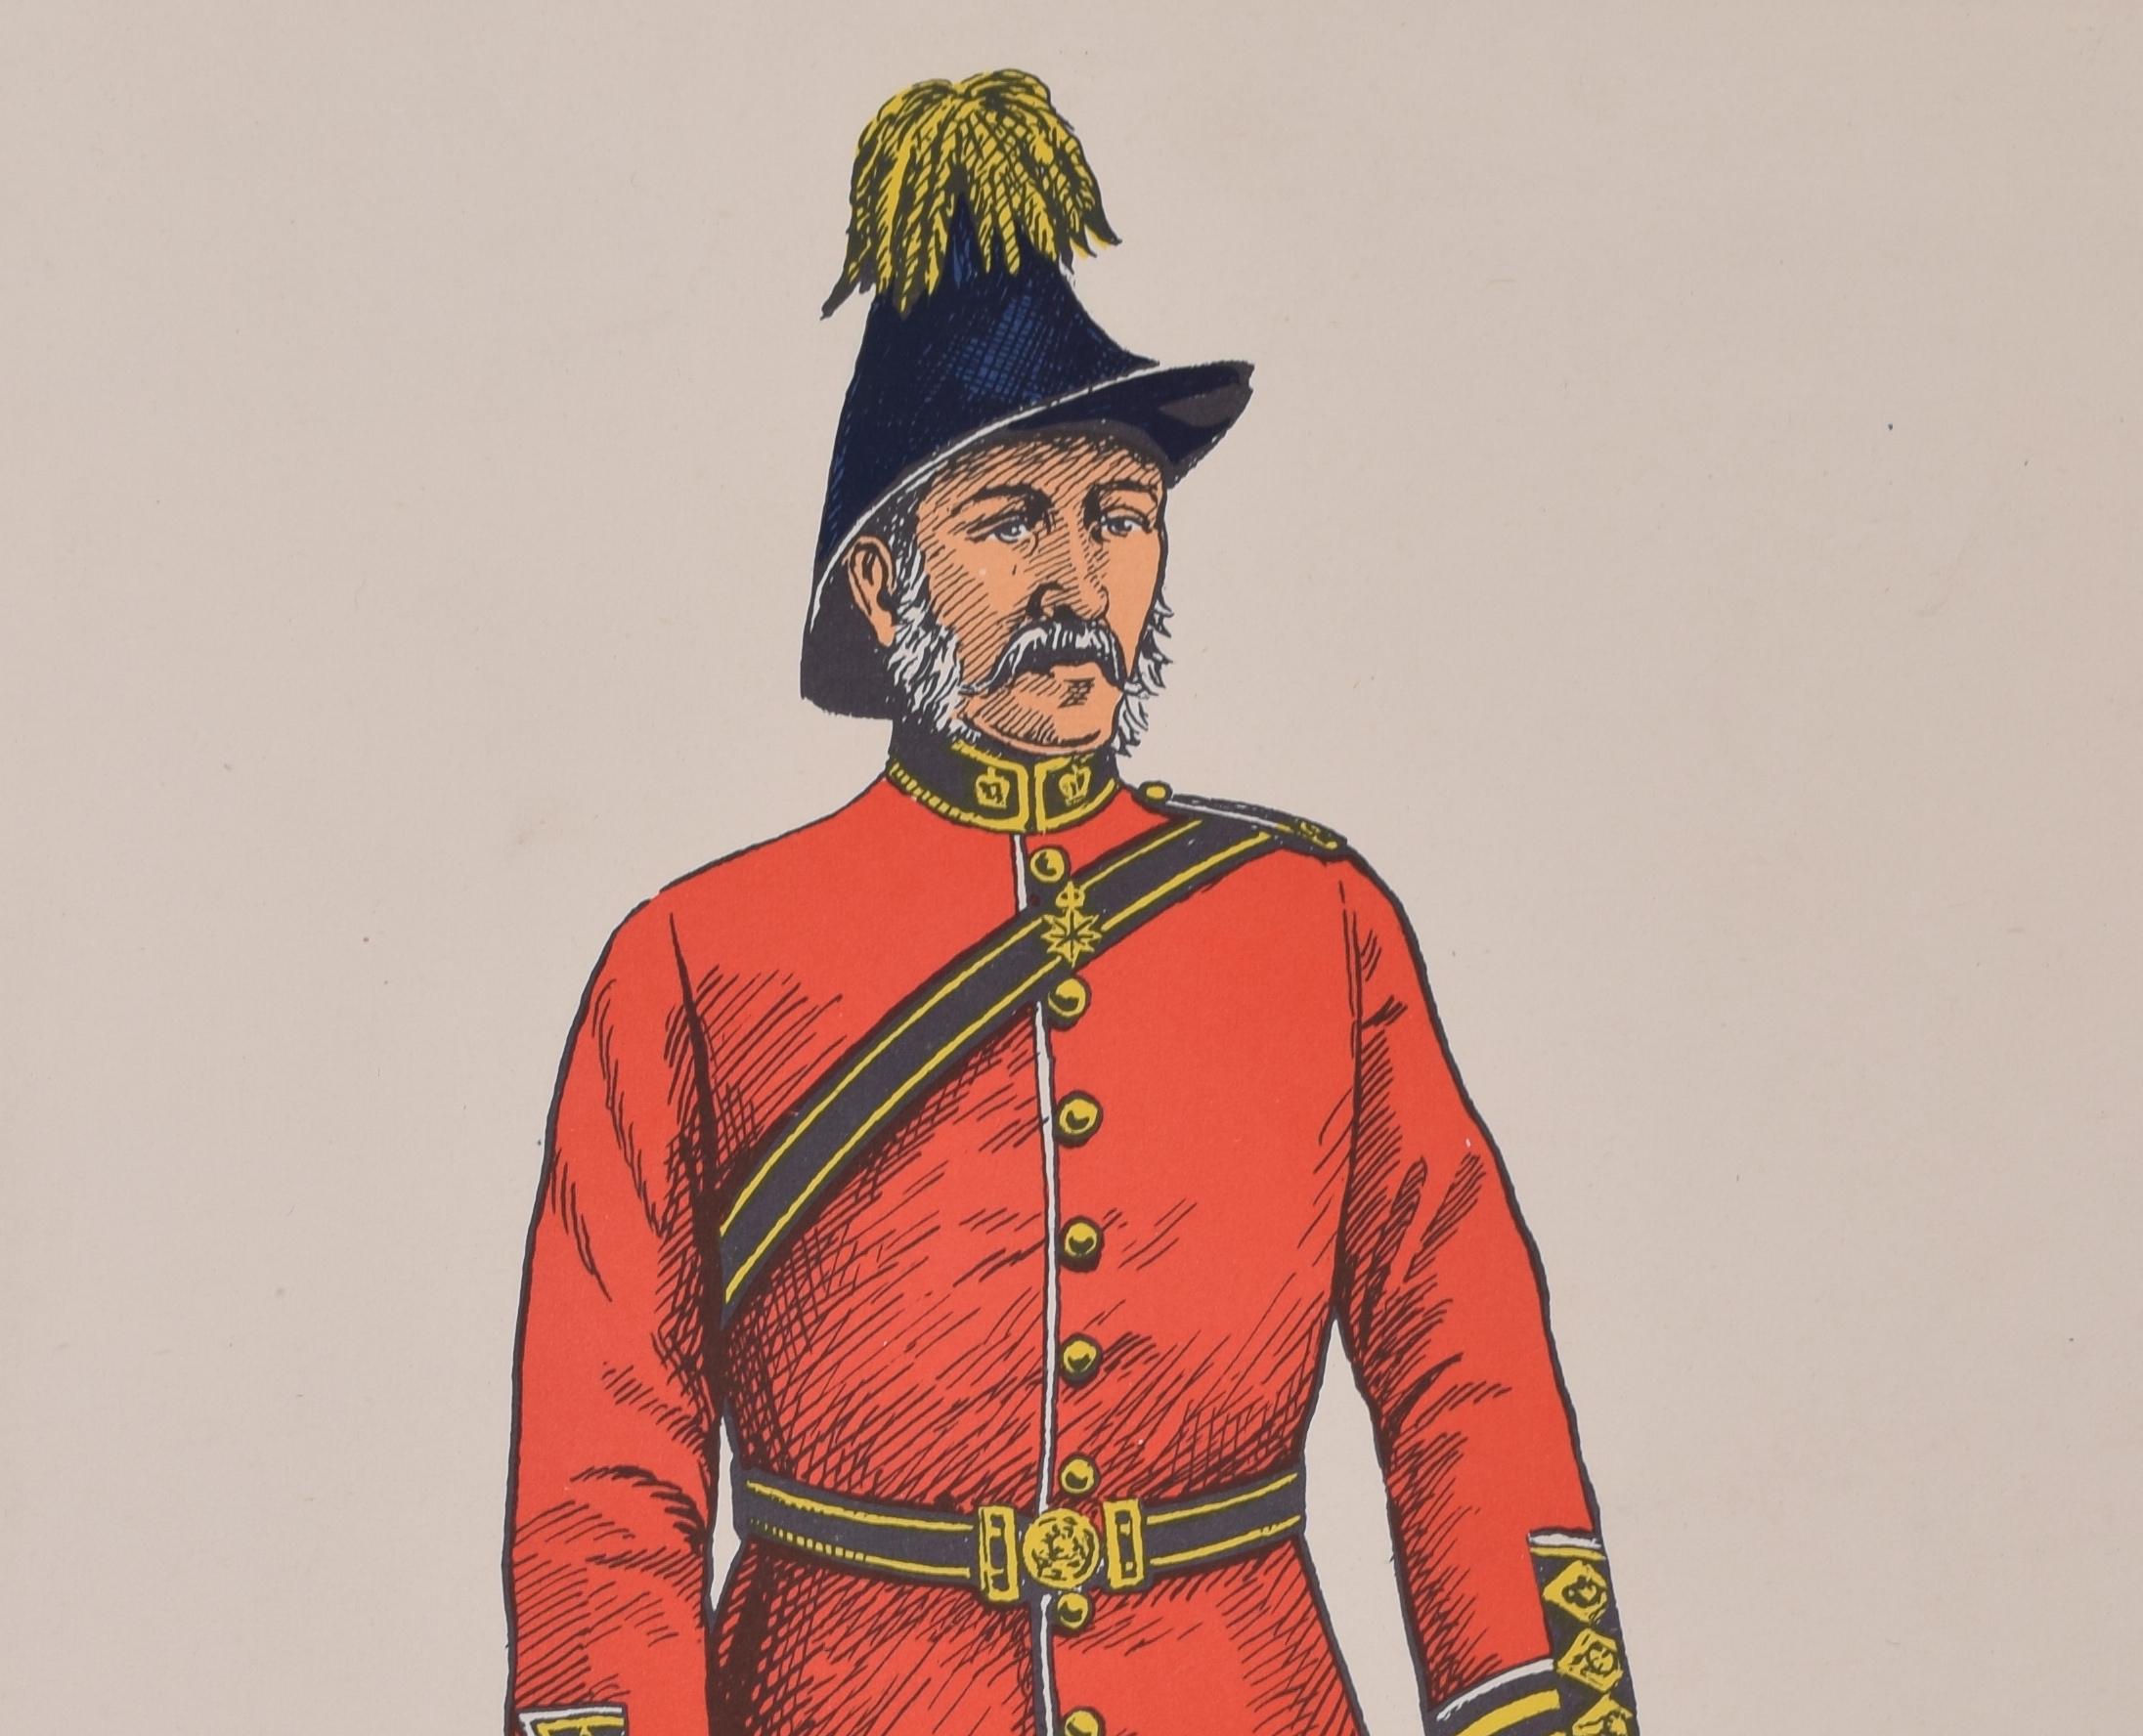 Armee Hospital Corps Surgeon Institute of Army Education Uniform-Lithographie – Print von Unknown